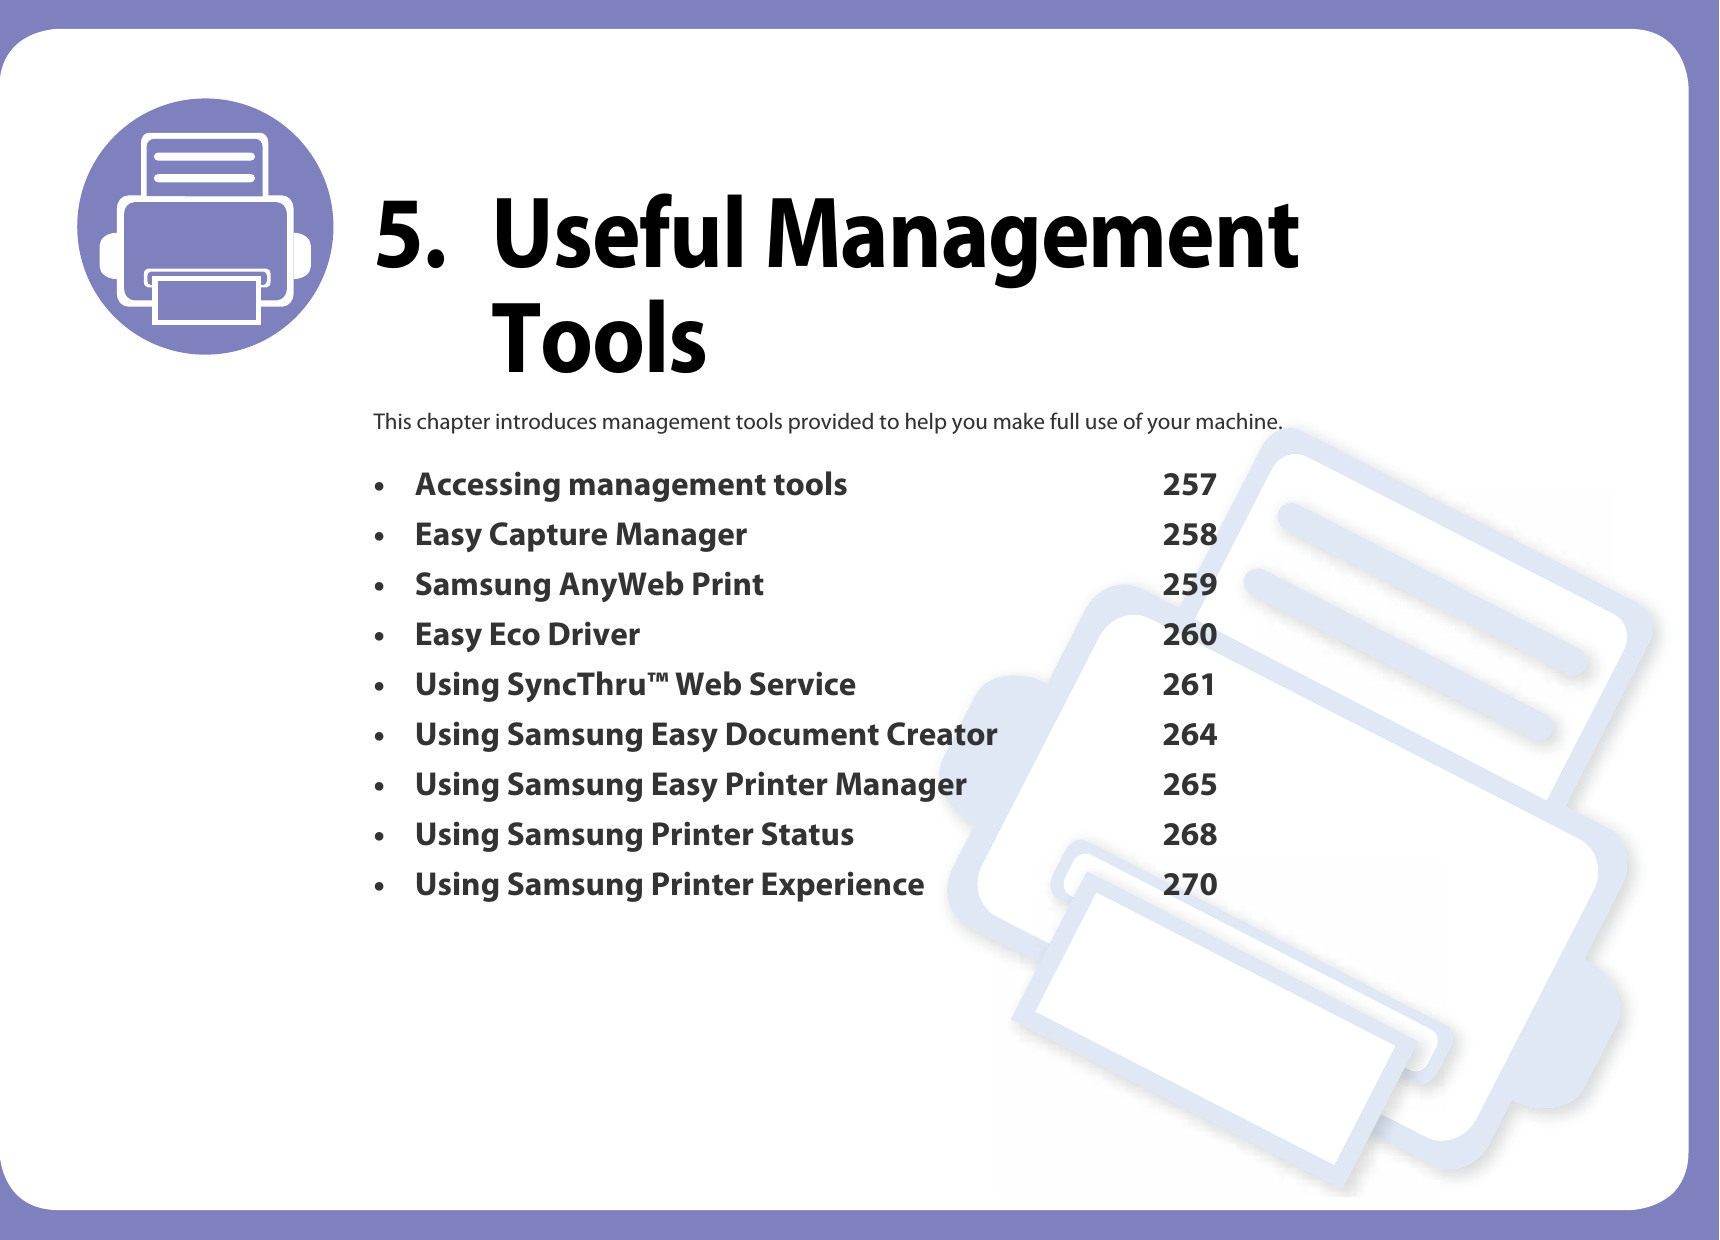 5. Useful Management ToolsThis chapter introduces management tools provided to help you make full use of your machine. • Accessing management tools 257• Easy Capture Manager 258• Samsung AnyWeb Print 259• Easy Eco Driver 260• Using SyncThru™ Web Service 261• Using Samsung Easy Document Creator 264• Using Samsung Easy Printer Manager 265• Using Samsung Printer Status 268• Using Samsung Printer Experience 270